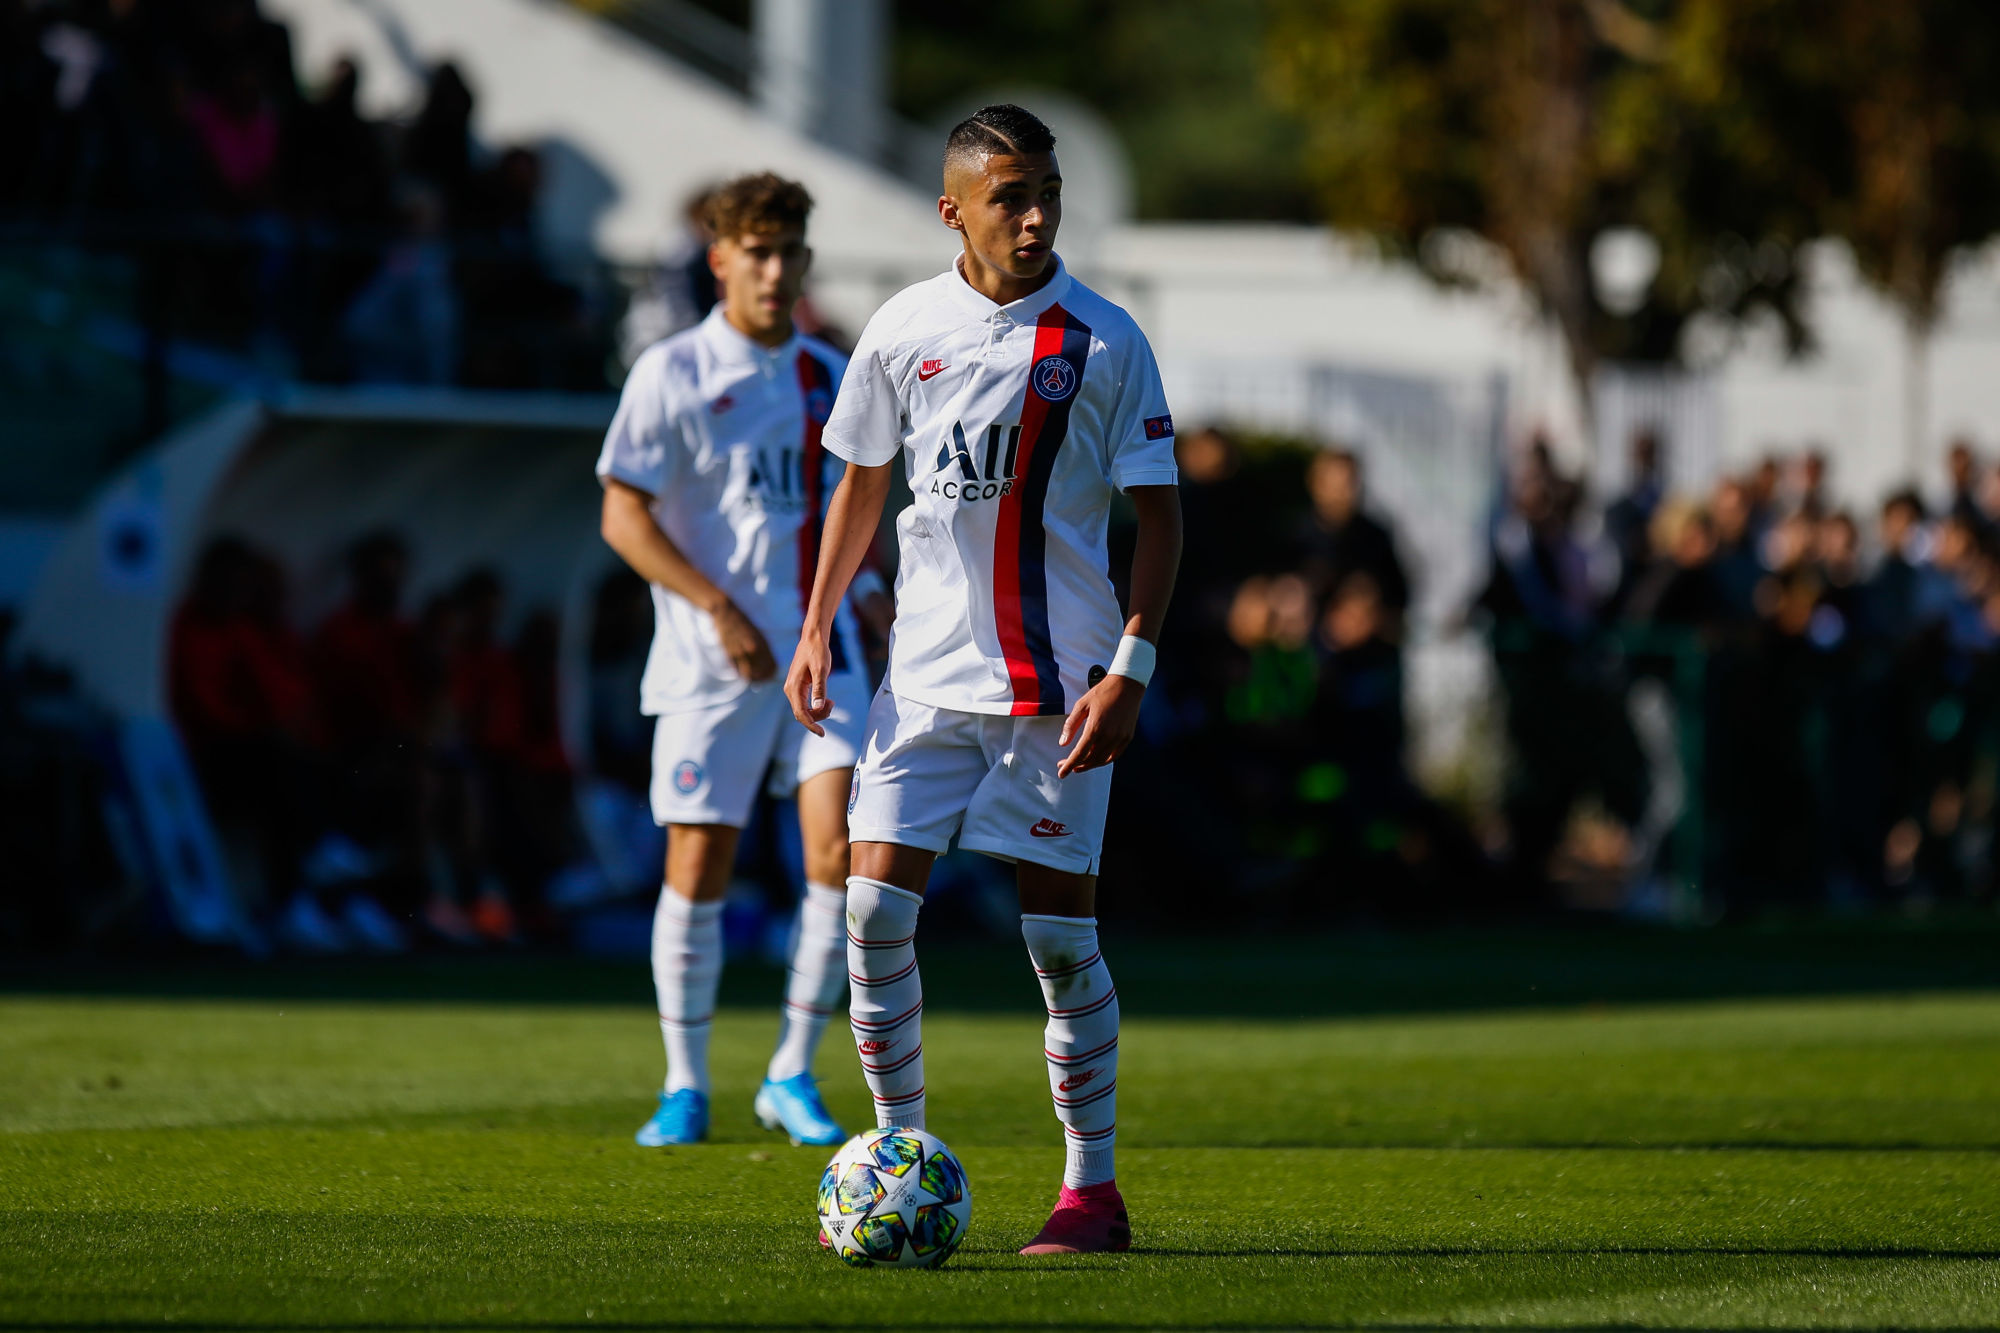 Kays RUIZ ATIL of PSG during the Youth League match between Paris Saint Germain and Real Madrid at Camp des Loges on September 18, 2019 in Paris, France. (Photo by Johnny Fidelin/Icon Sport) - Kays RUIZ ATIL - Camp des Loges - Saint Germain en Laye (France)